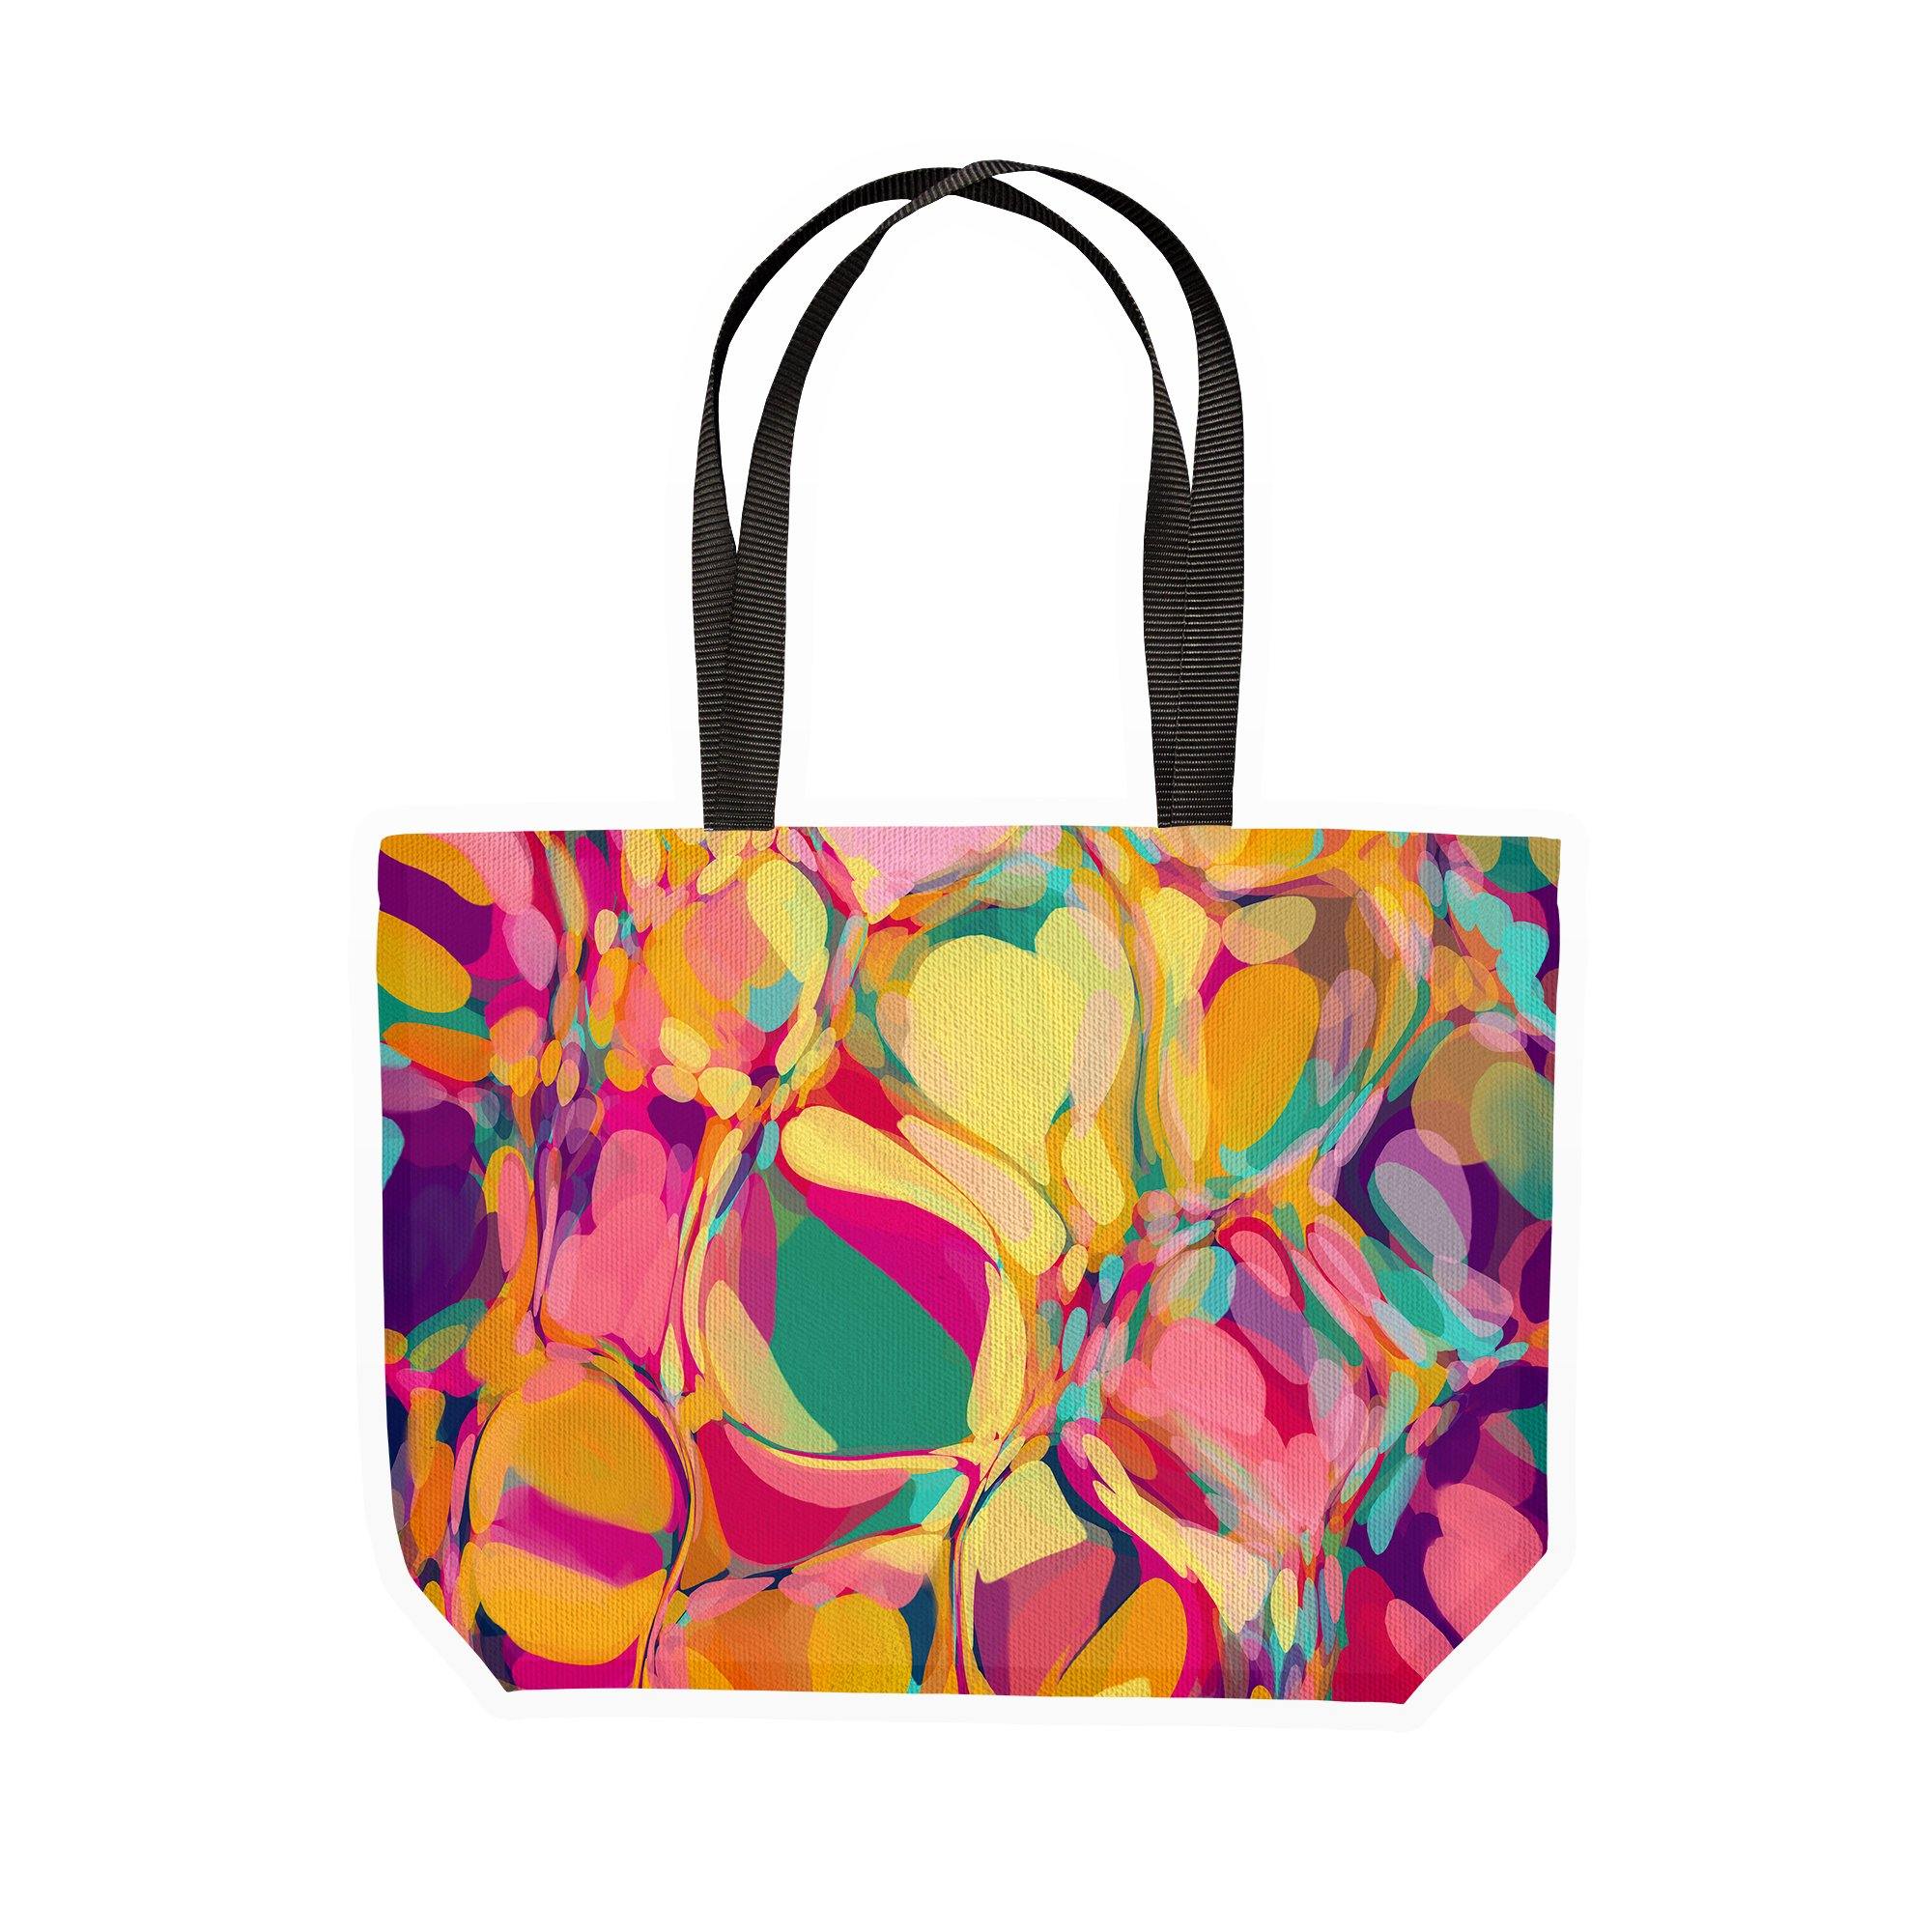 Joy Colourful Canvas Shopping Tote Bag - Louise Mead